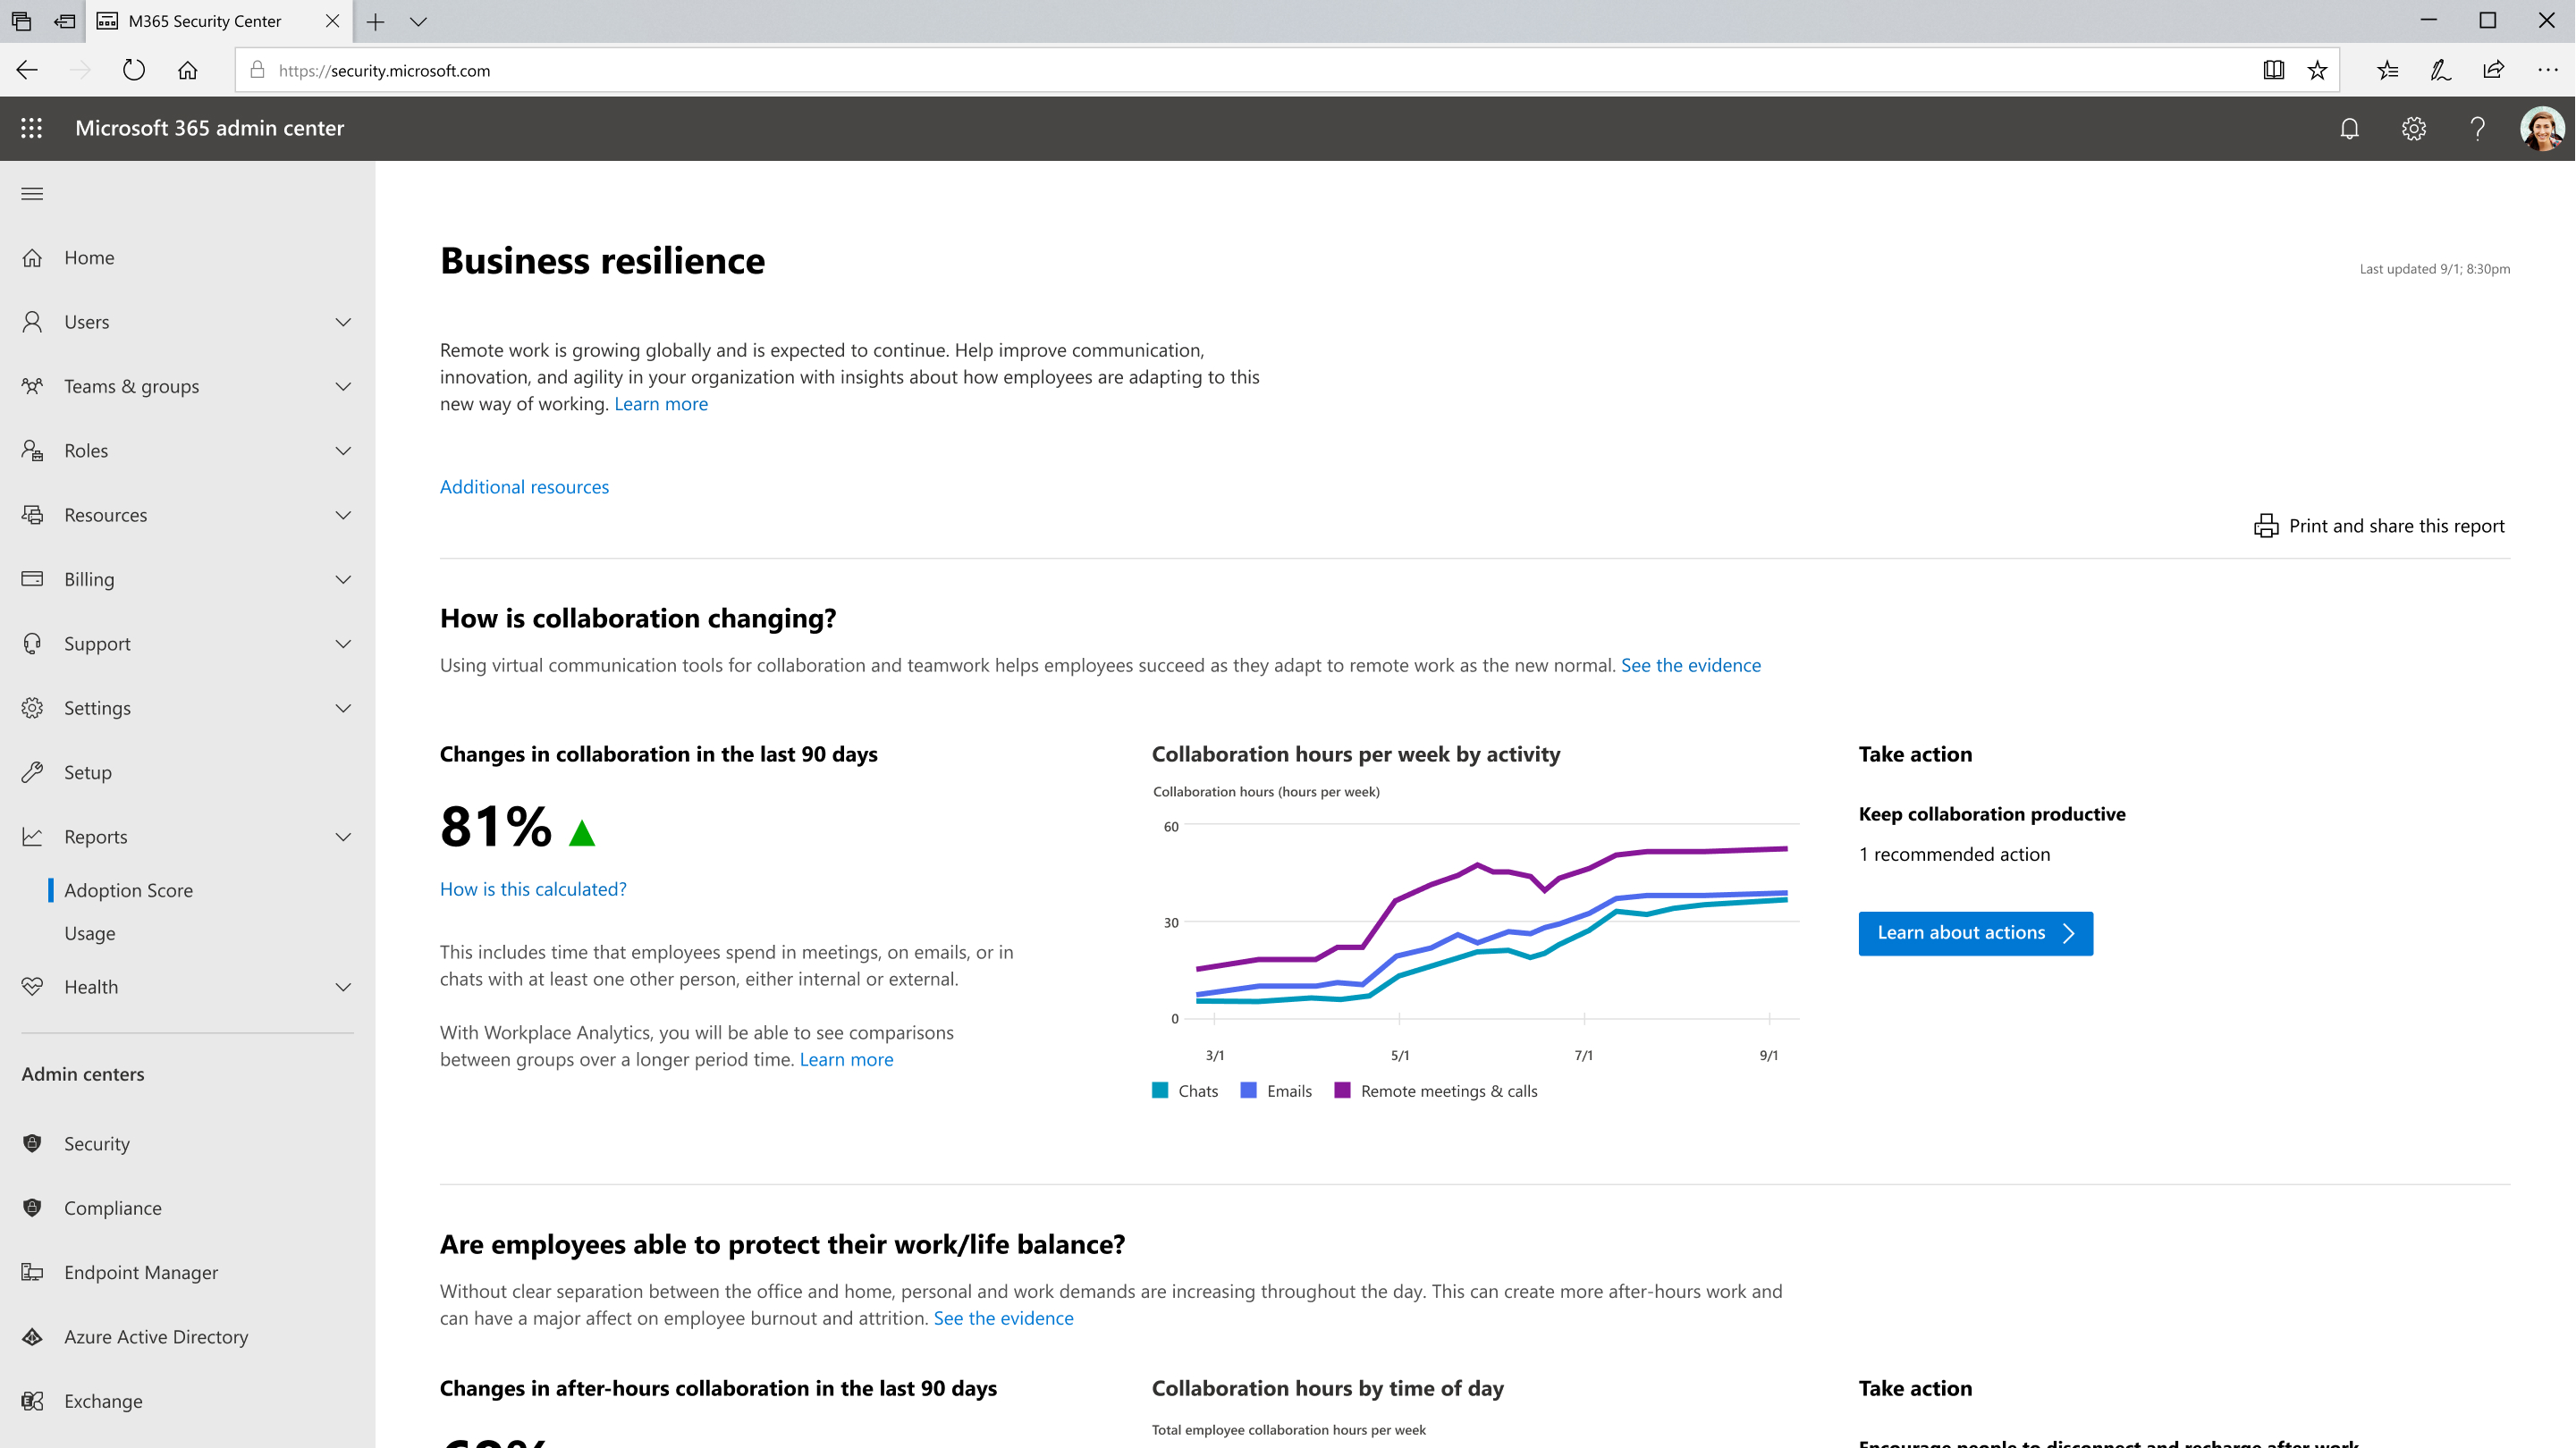 Screenshot that shows the Business resilience option within Adoption Score.